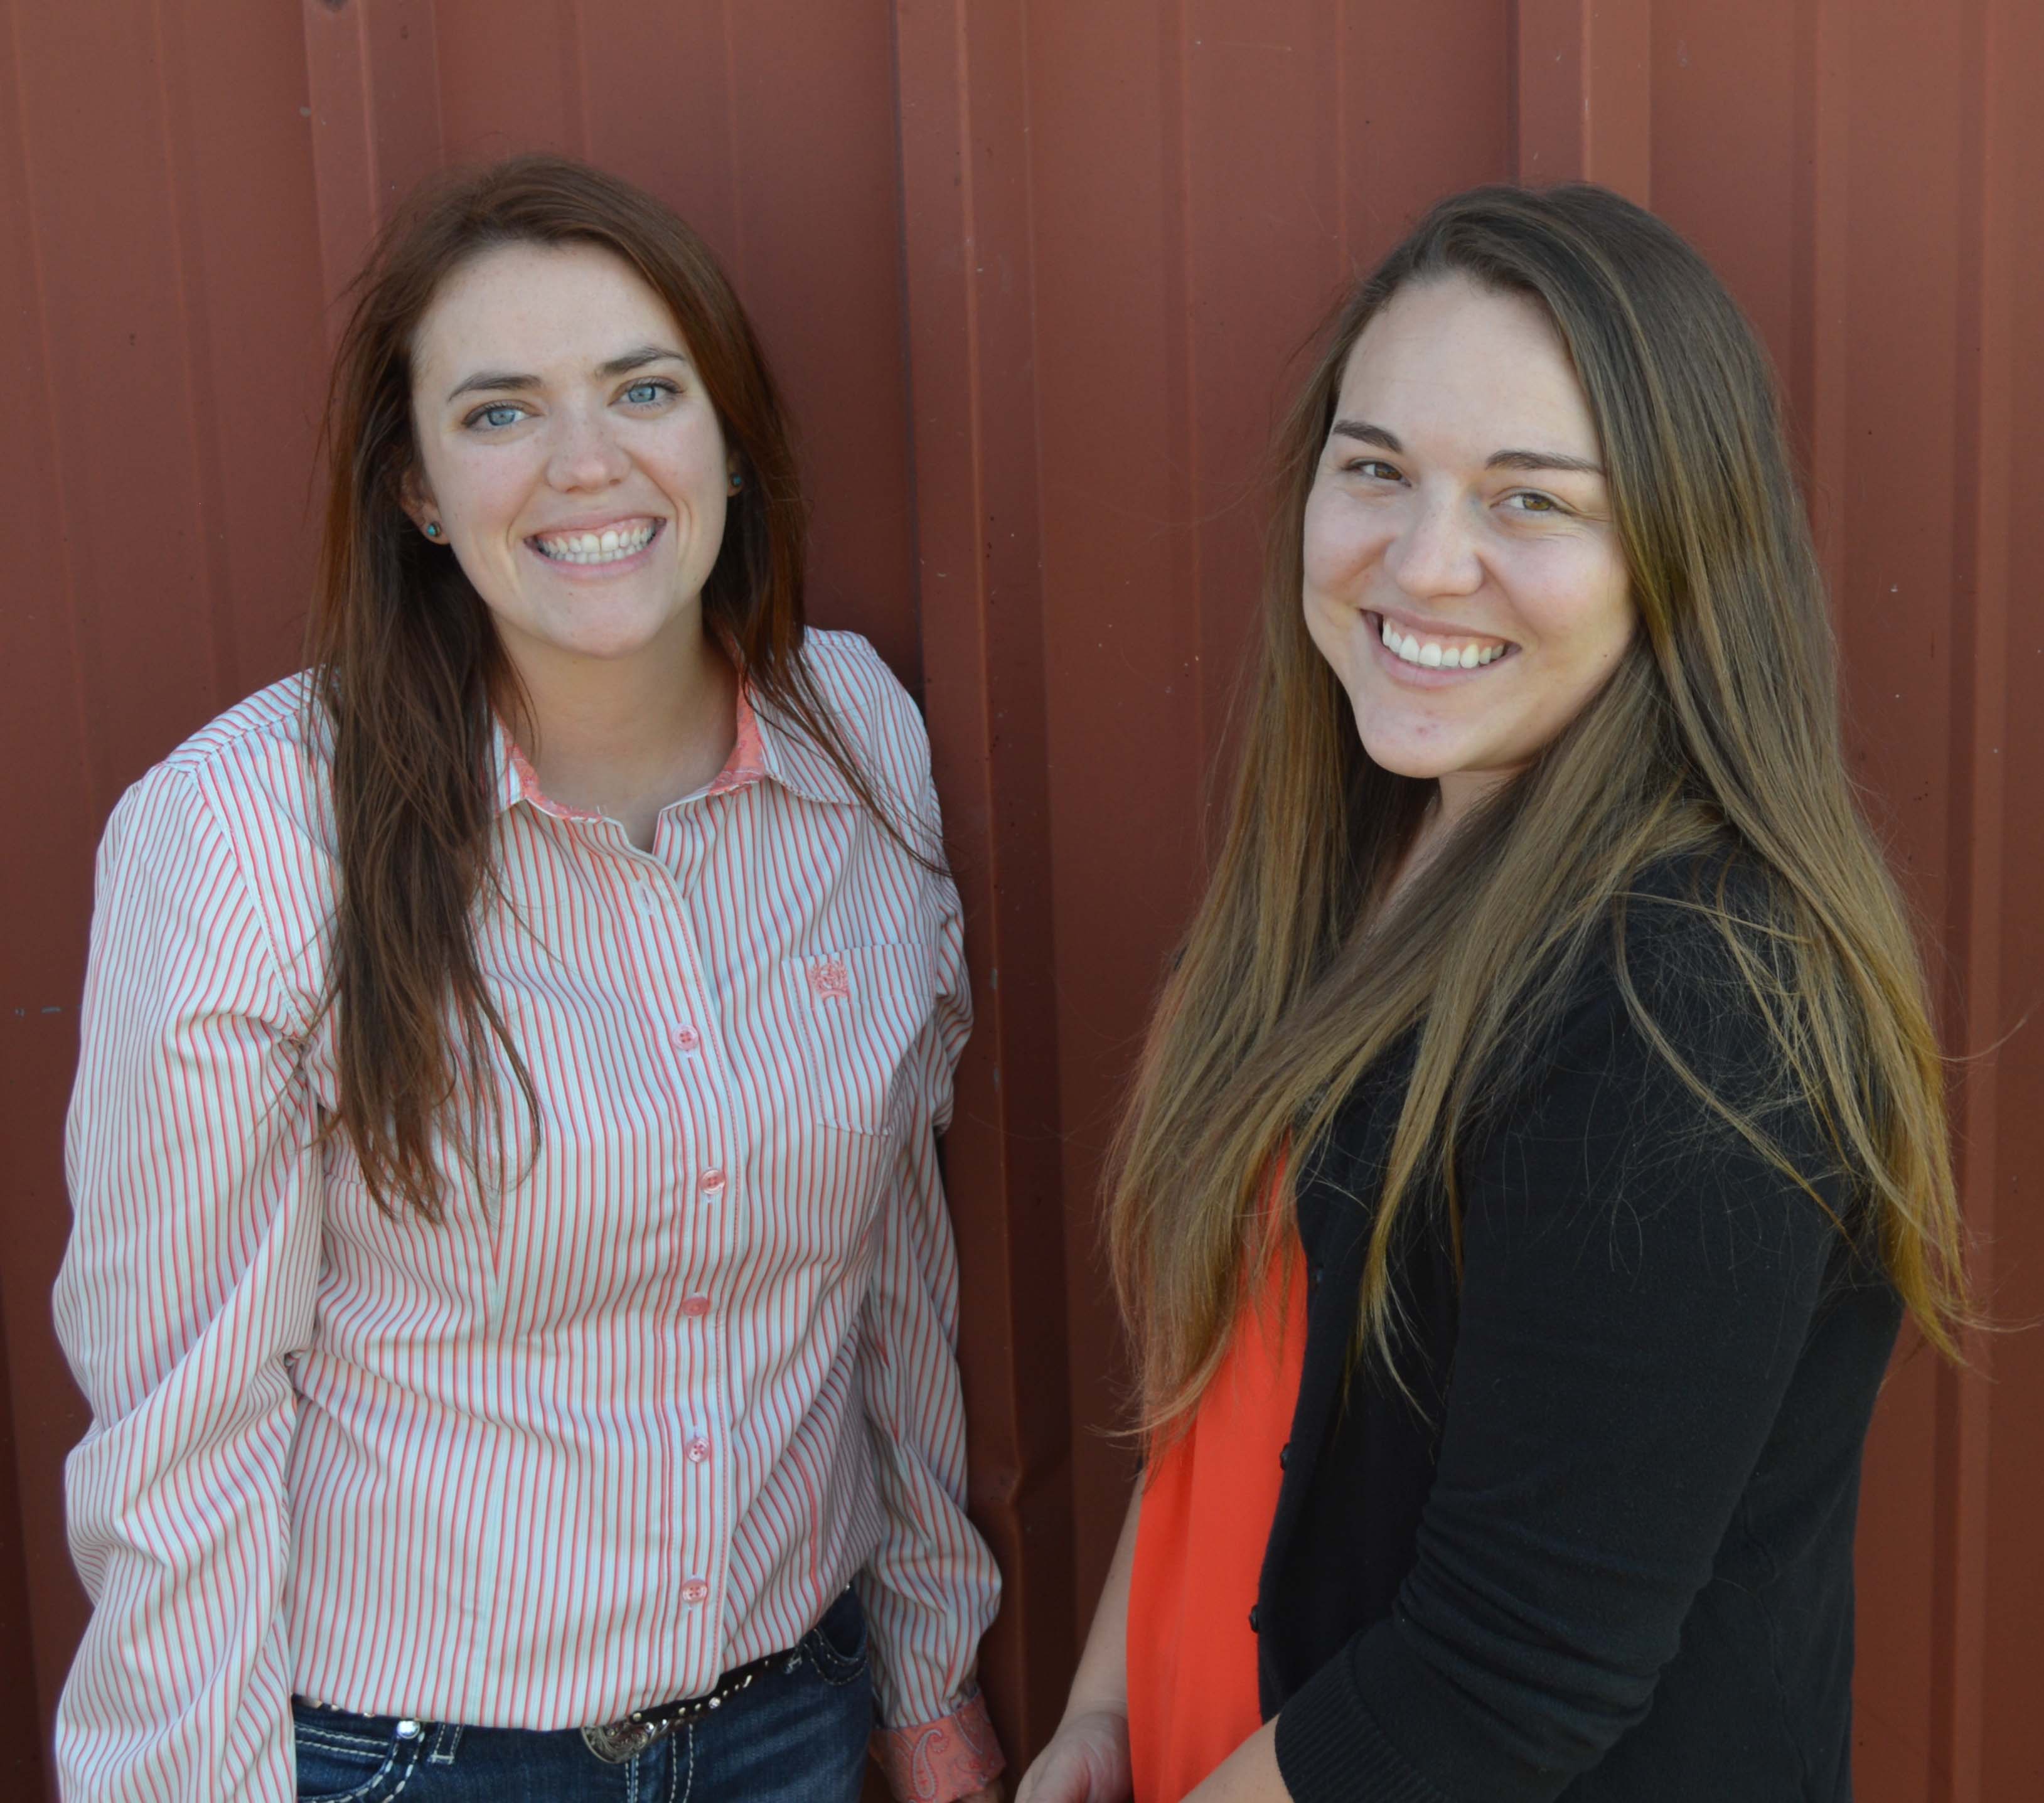 Tasha King, at left, and Joslyn Beard are instructors in the NCTA Animal Science Division. (Nutter/ NCTA photo)